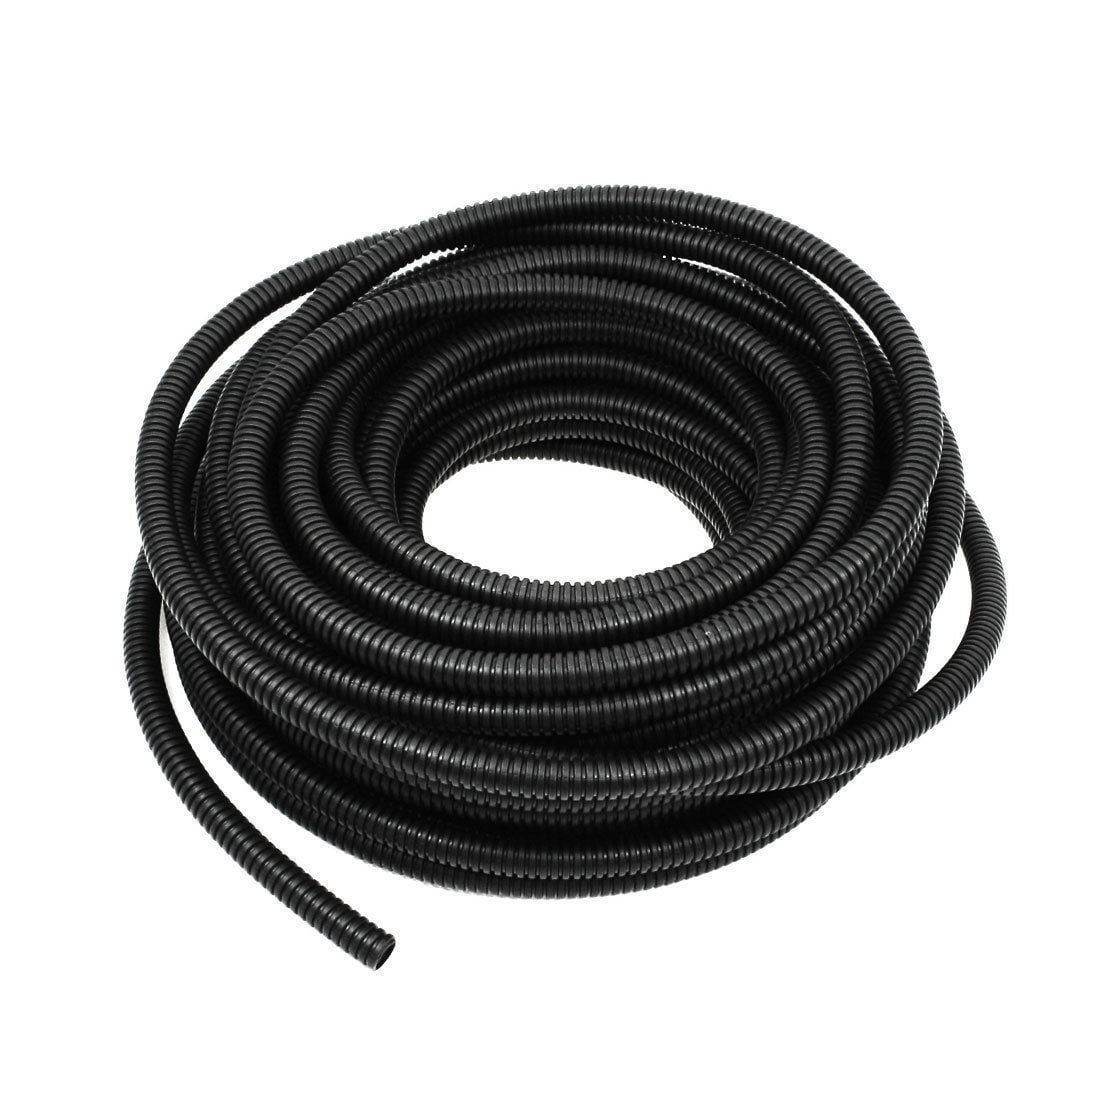 Heavy Duty Garden Wire Split Loom Conduit Tubing Cable Sleeving Cord Management 